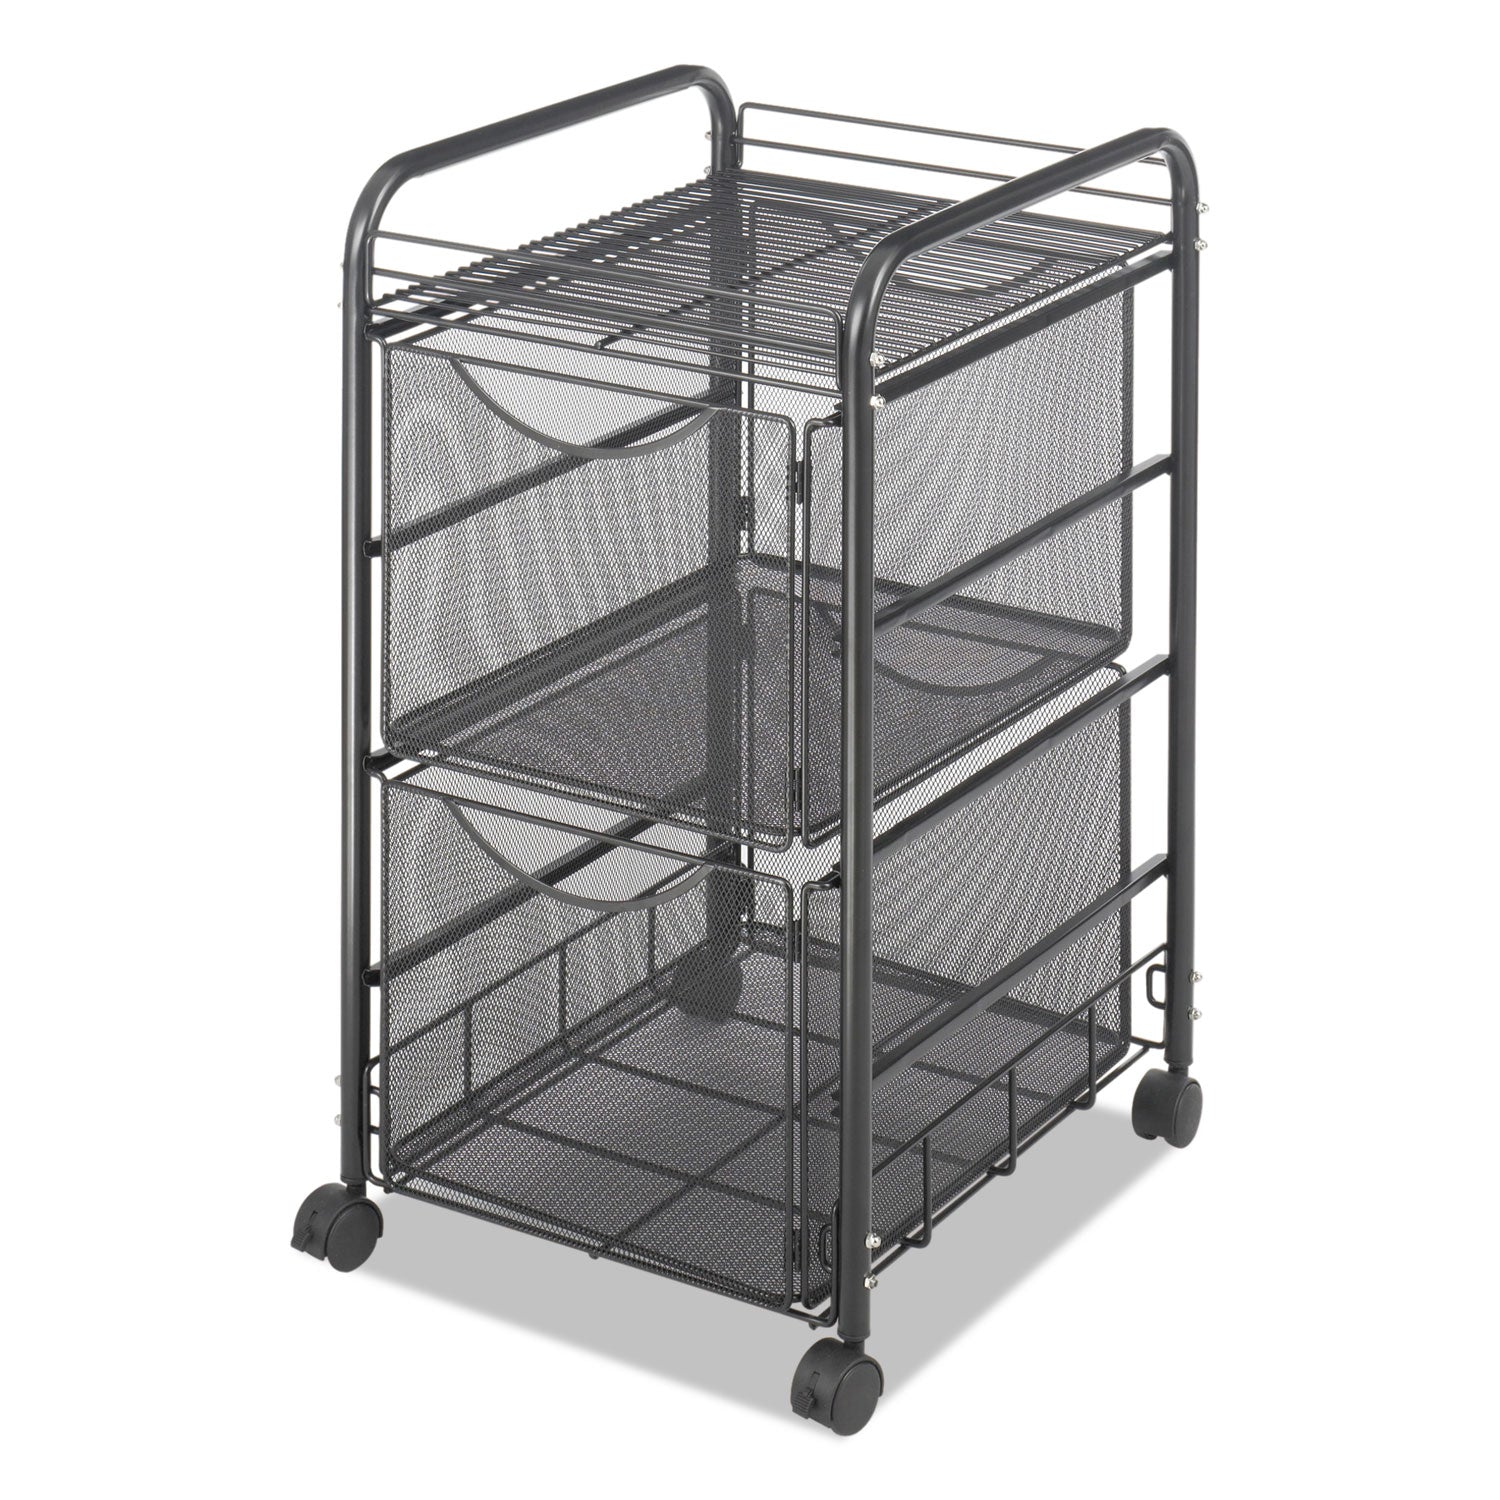 Safco Onyx Double Mesh Mobile File Cart - 2 Shelf - 2 Drawer - 4 Casters - 1.50" Caster Size - x 15.8" Width x 17" Depth x 27" Height - Black Steel Frame - Black - 1 Each - 2